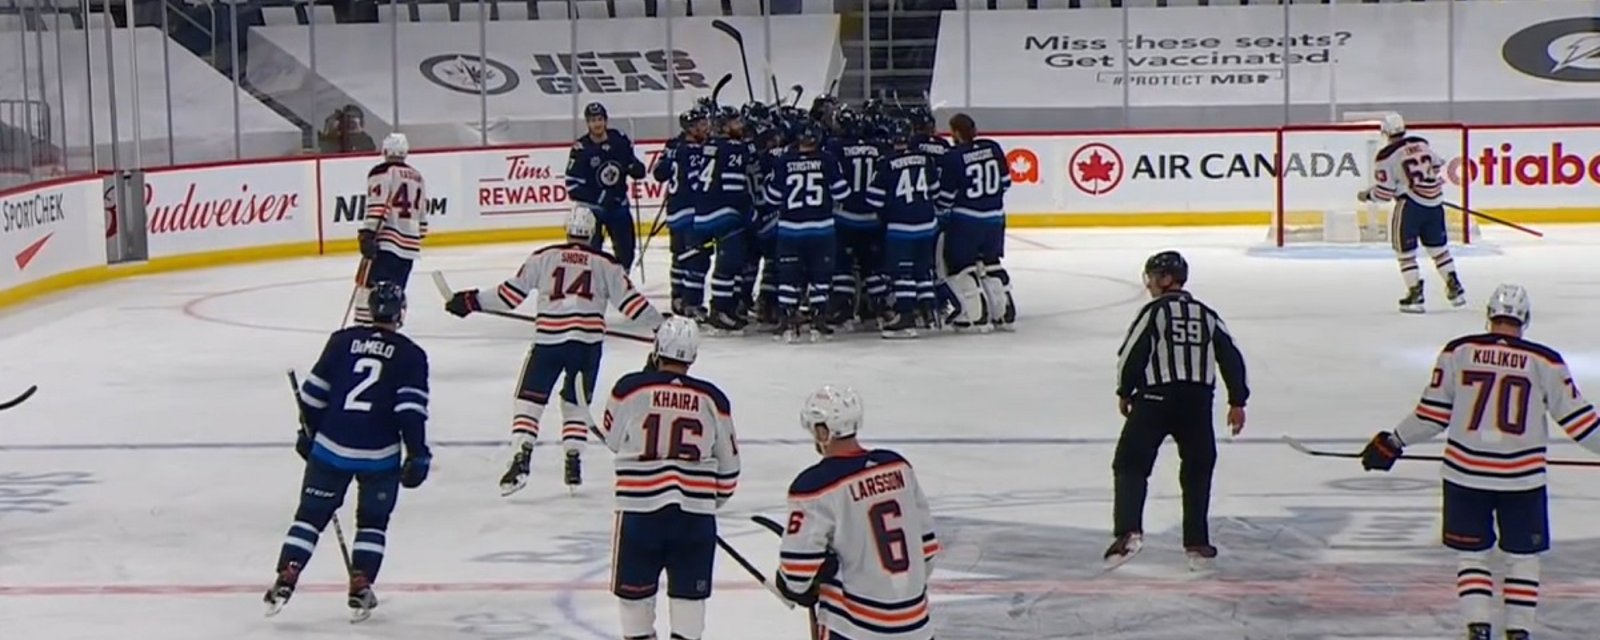 Oilers collapse in the third period, go on to lose in overtime.